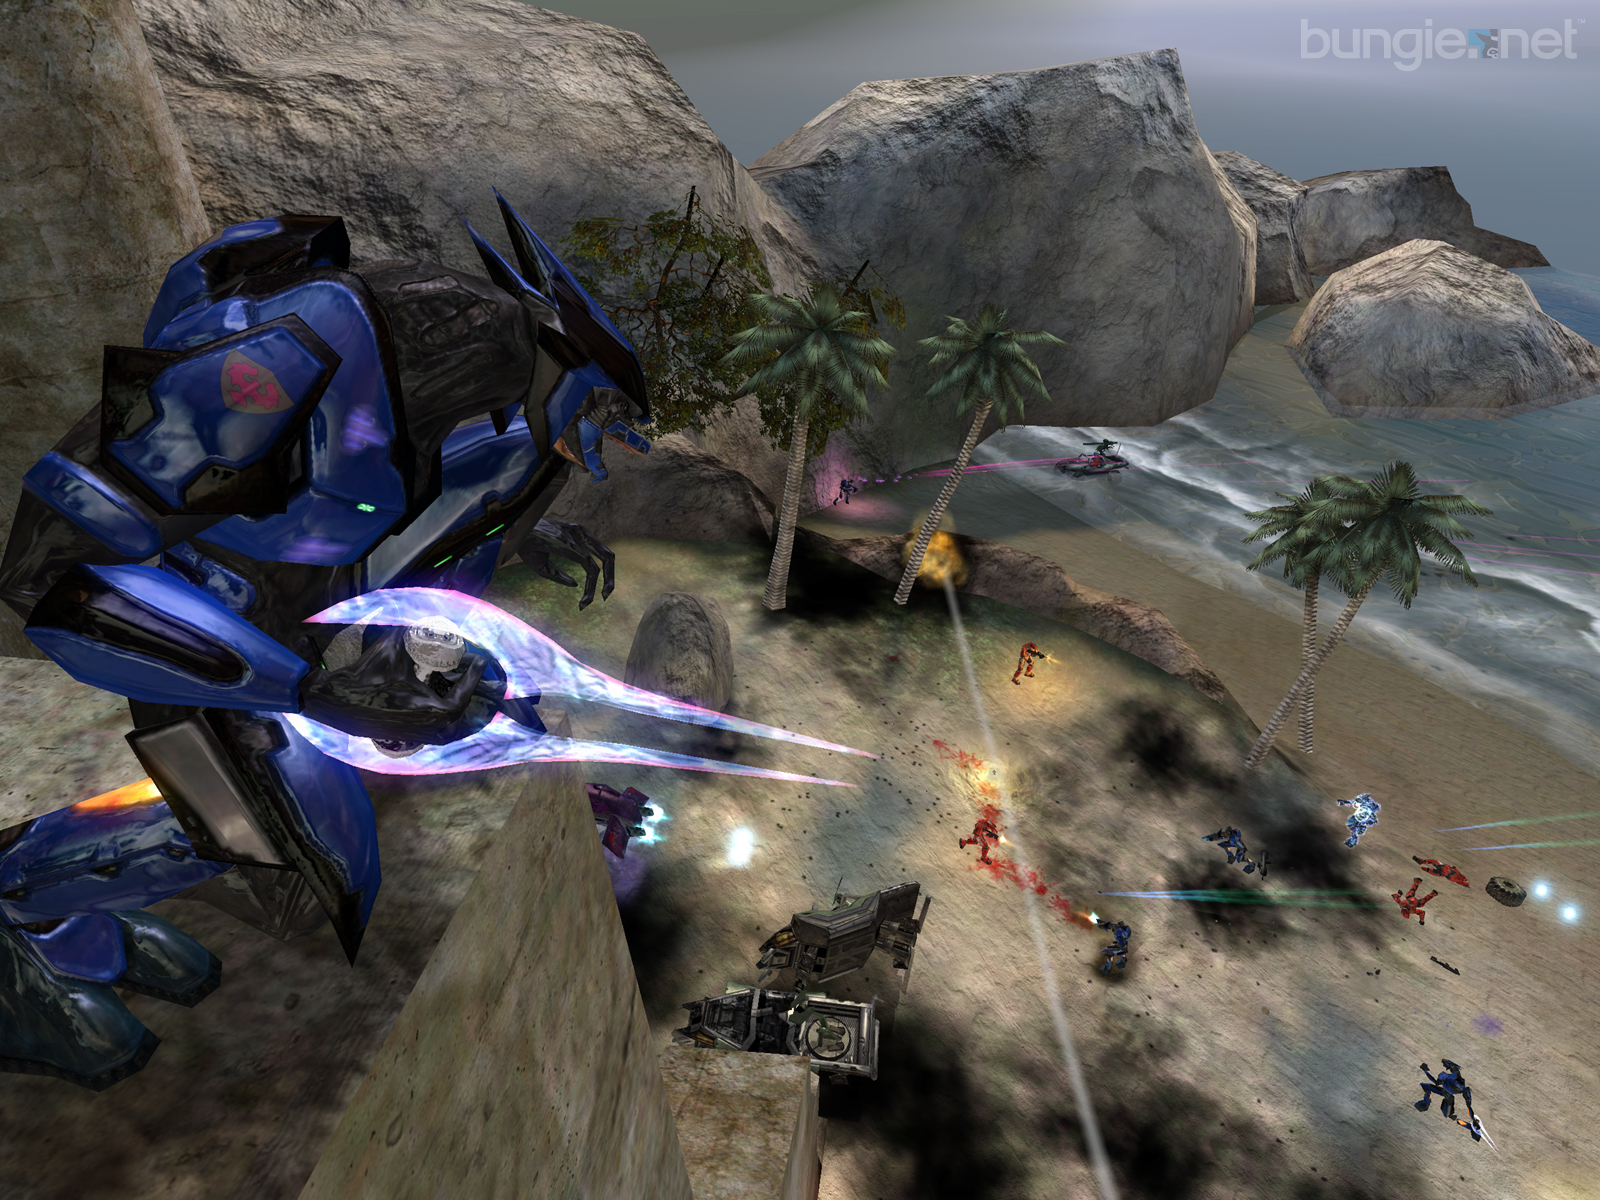 Video Game Halo 2 HD Wallpaper | Background Image